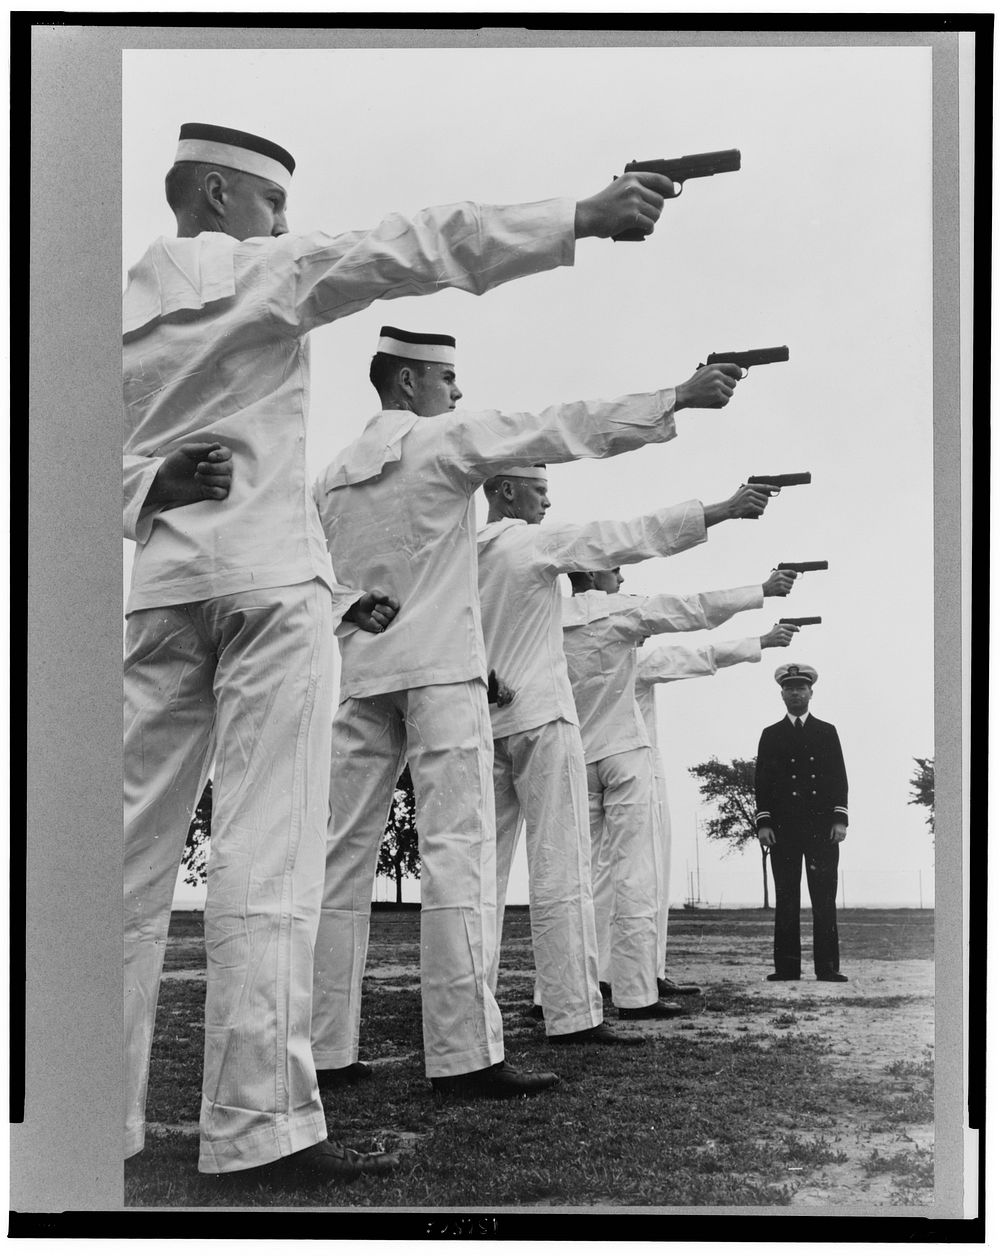 U.S. Naval Academy, Annapolis, Maryland. Instruction in pistol shooting. Sourced from the Library of Congress.